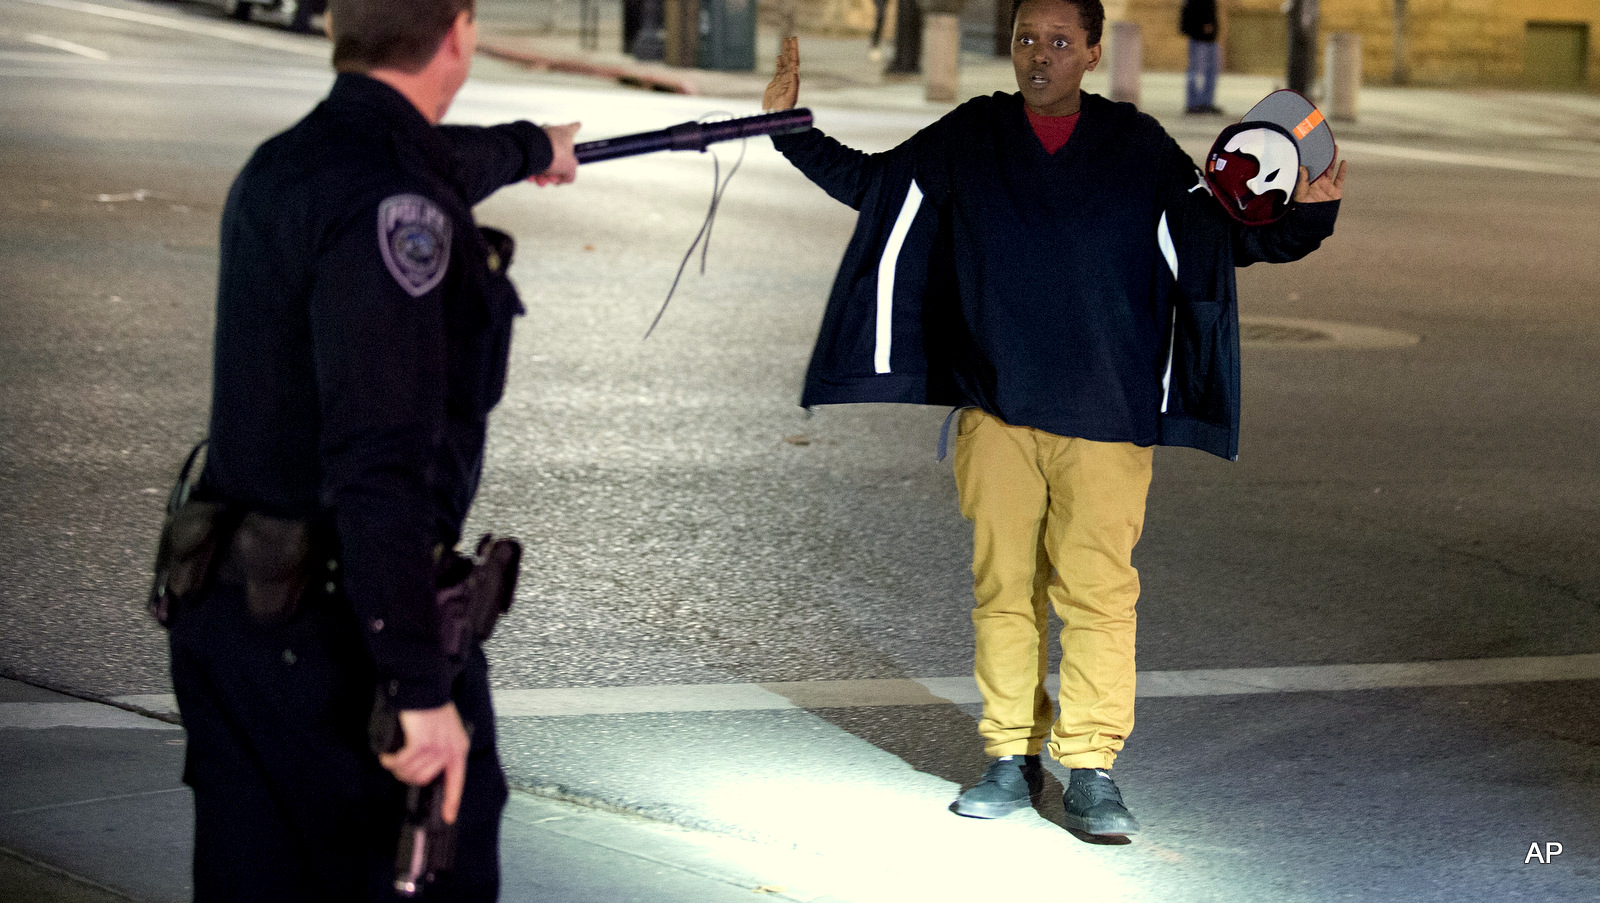 Police stop a person as he walks away from a crowd that formed after an officer-involved shooting at on South Rio Grande Street in Salt Lake City. Salt Lake County District Attorney Sim Gill said officers acted appropriately when they fired at Abdullahi "Abdi" Mohamed because police believed he was about to seriously injure or kill a man with a metal broom handle.